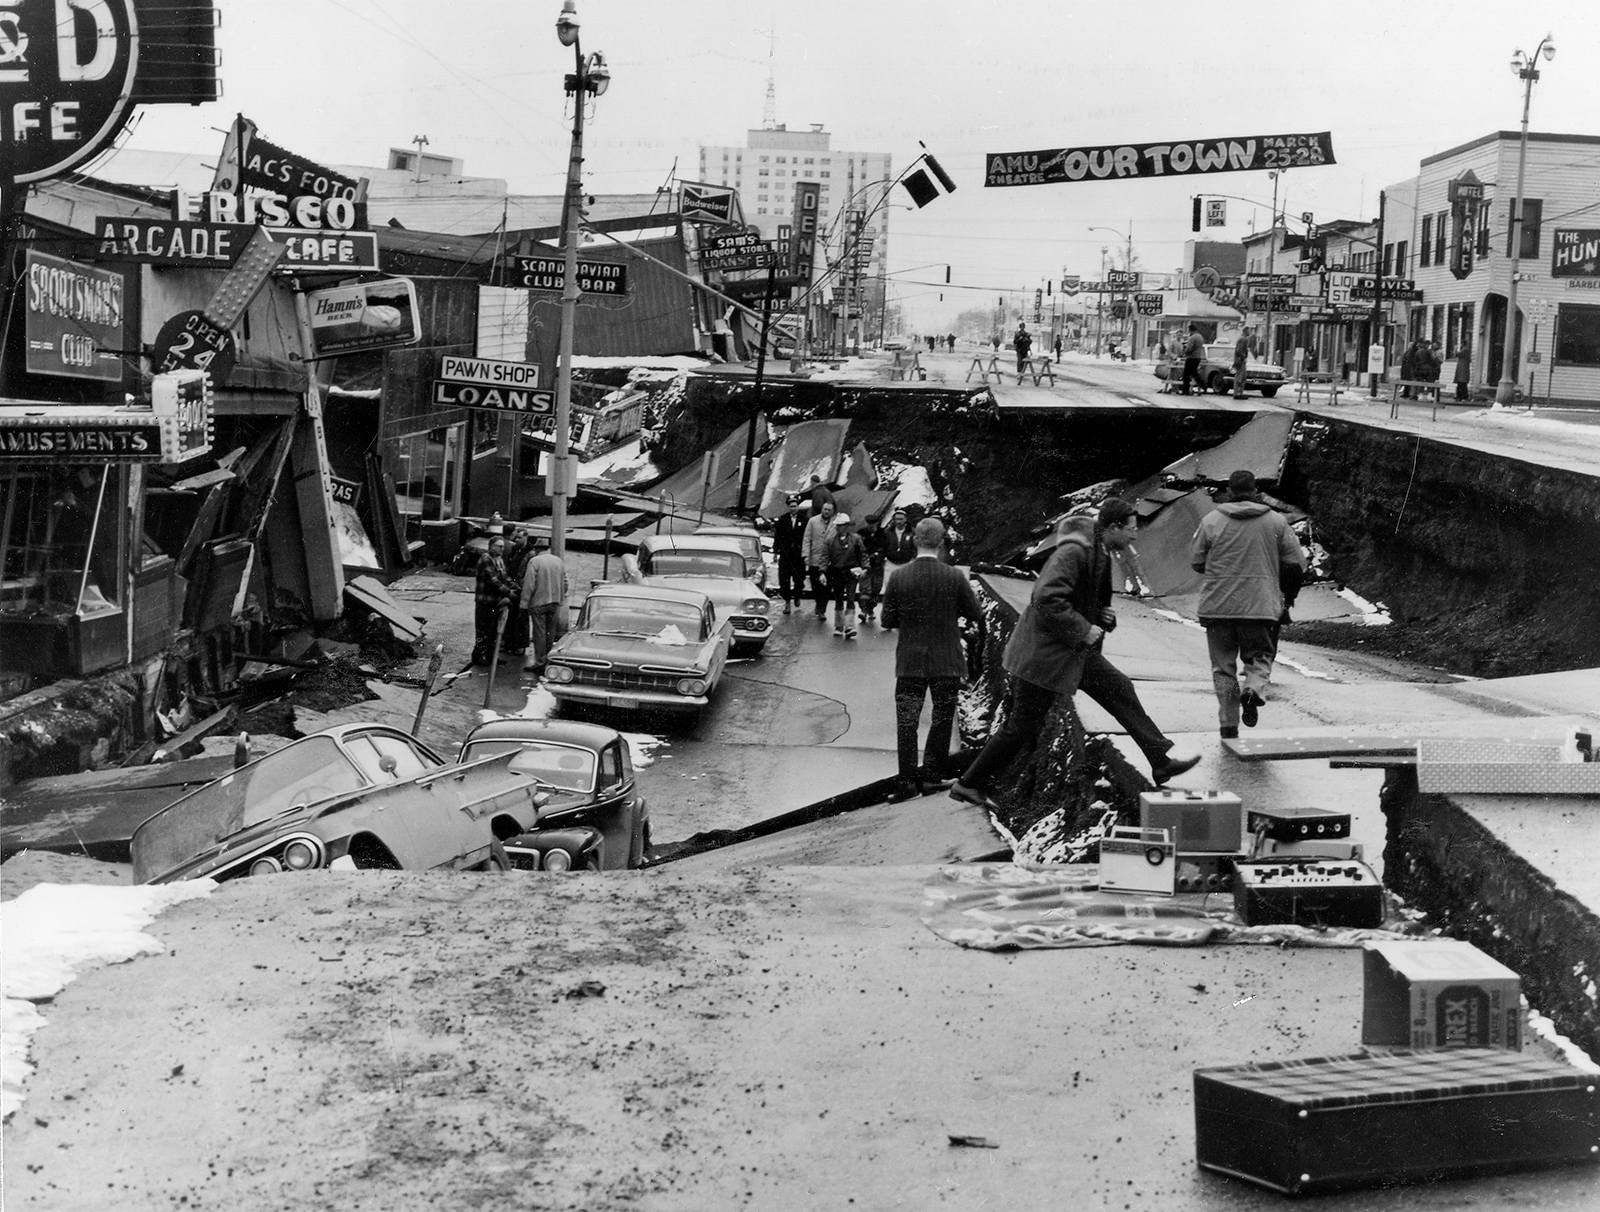 Fourth Avenue, Anchorage’s main commercial street, after the Great Alaska Earthquake, March 1964